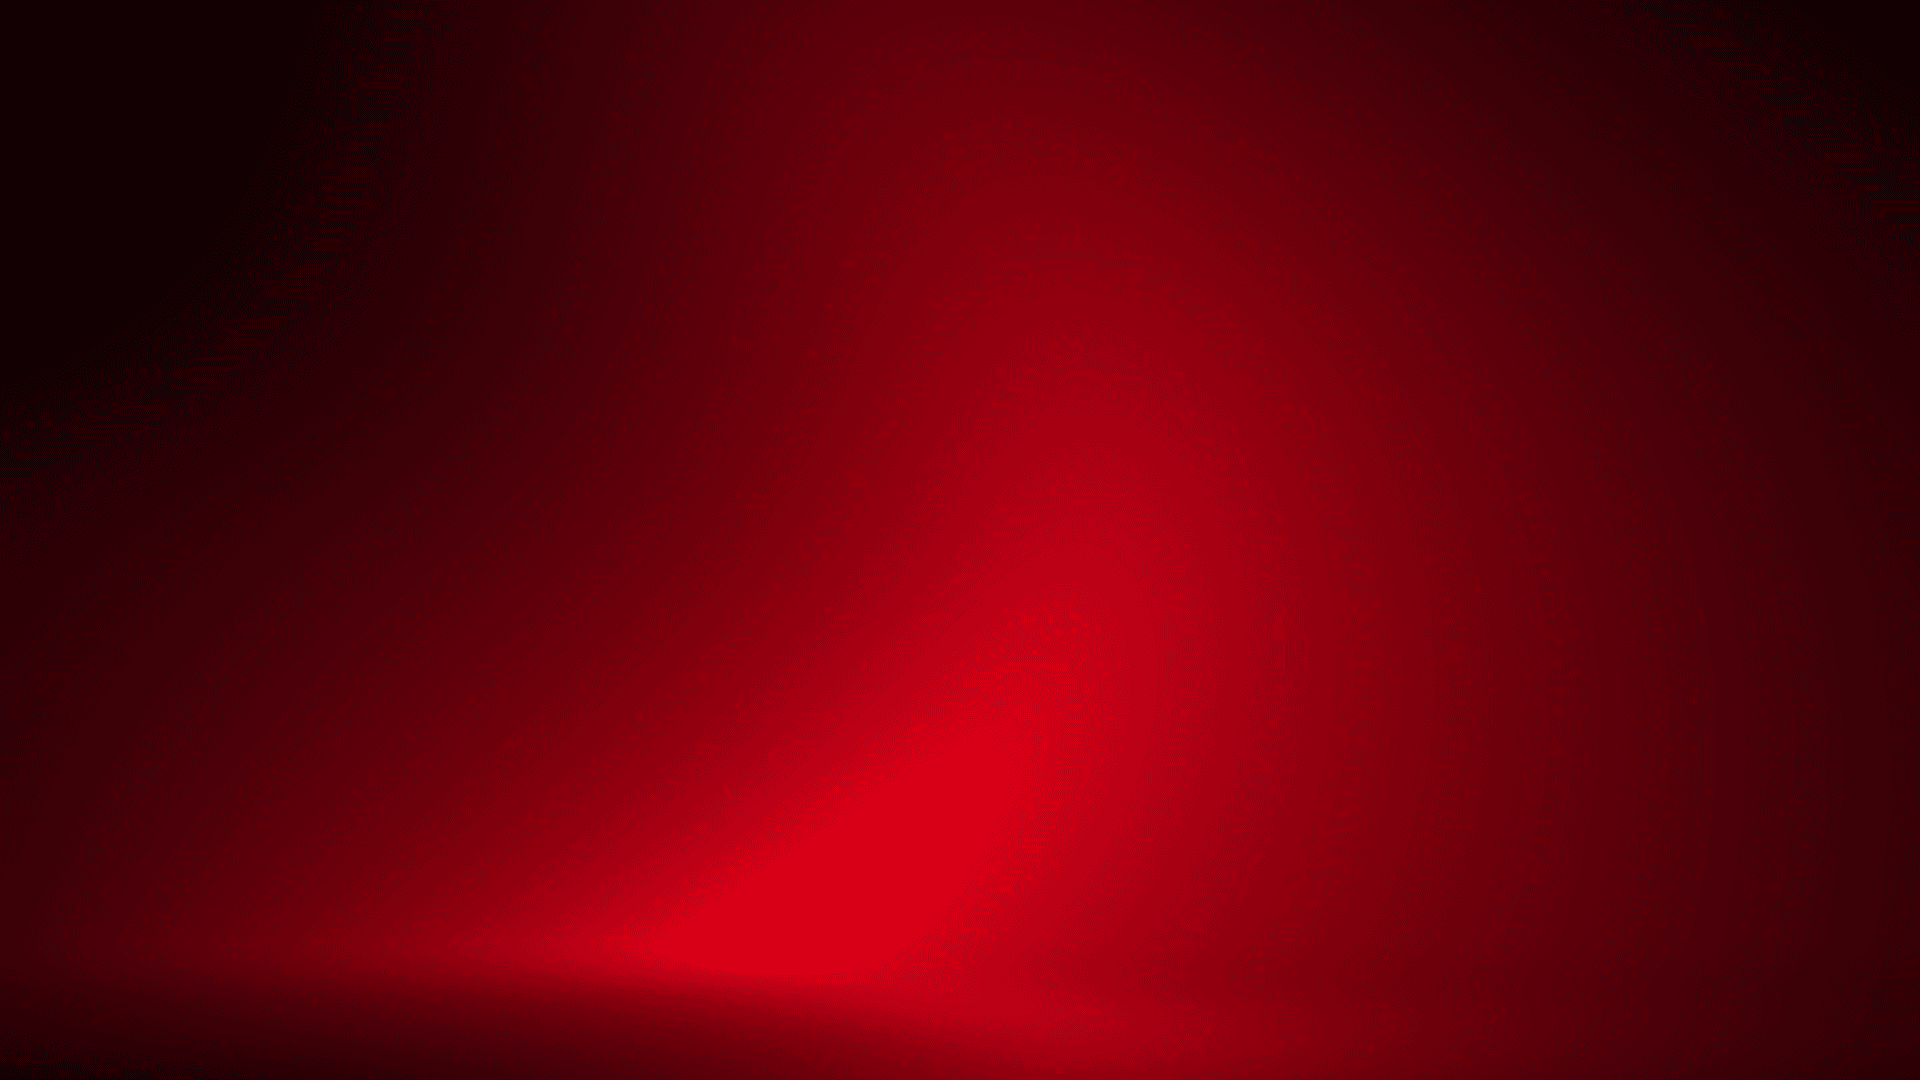 100+] Plain Red Wallpapers